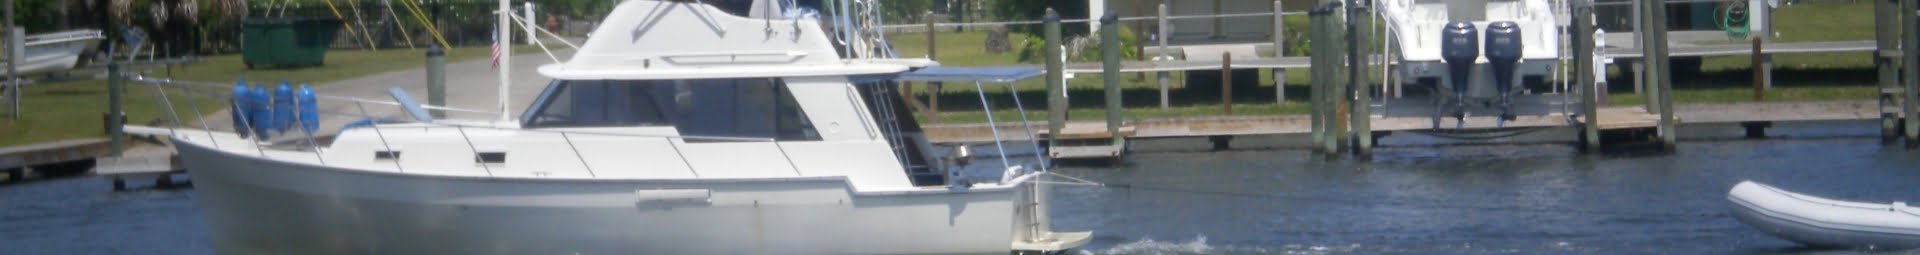 Boat in front of Mariners Landing